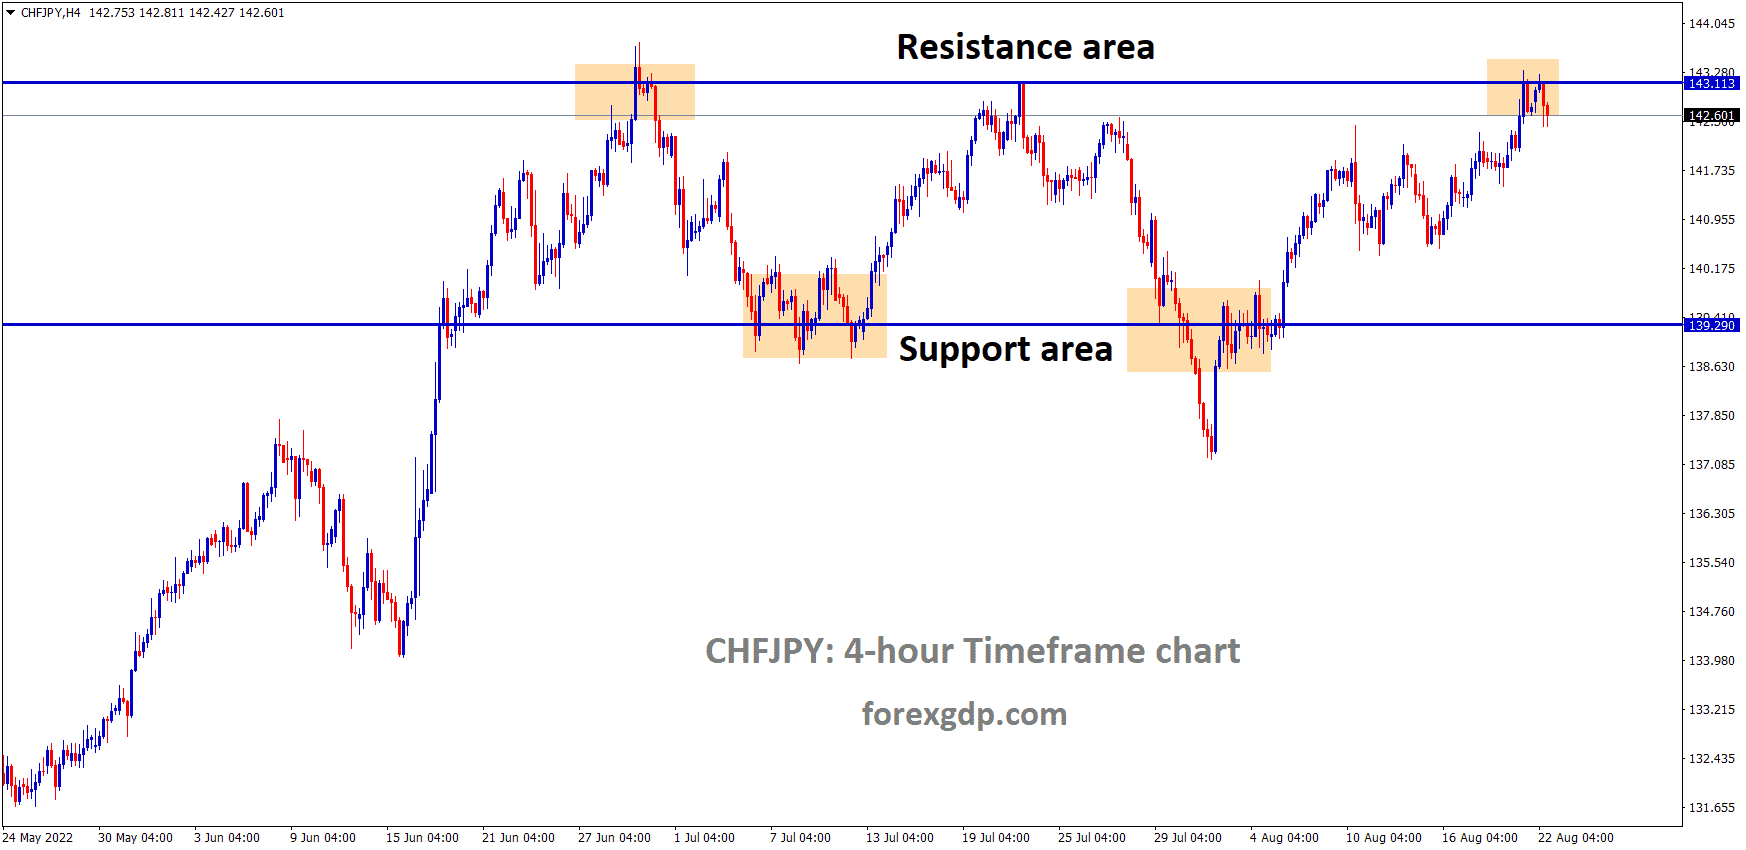 CHFJPY is moving in the Box Pattern and the Market has fallen from the horizontal resistance area of the Pattern